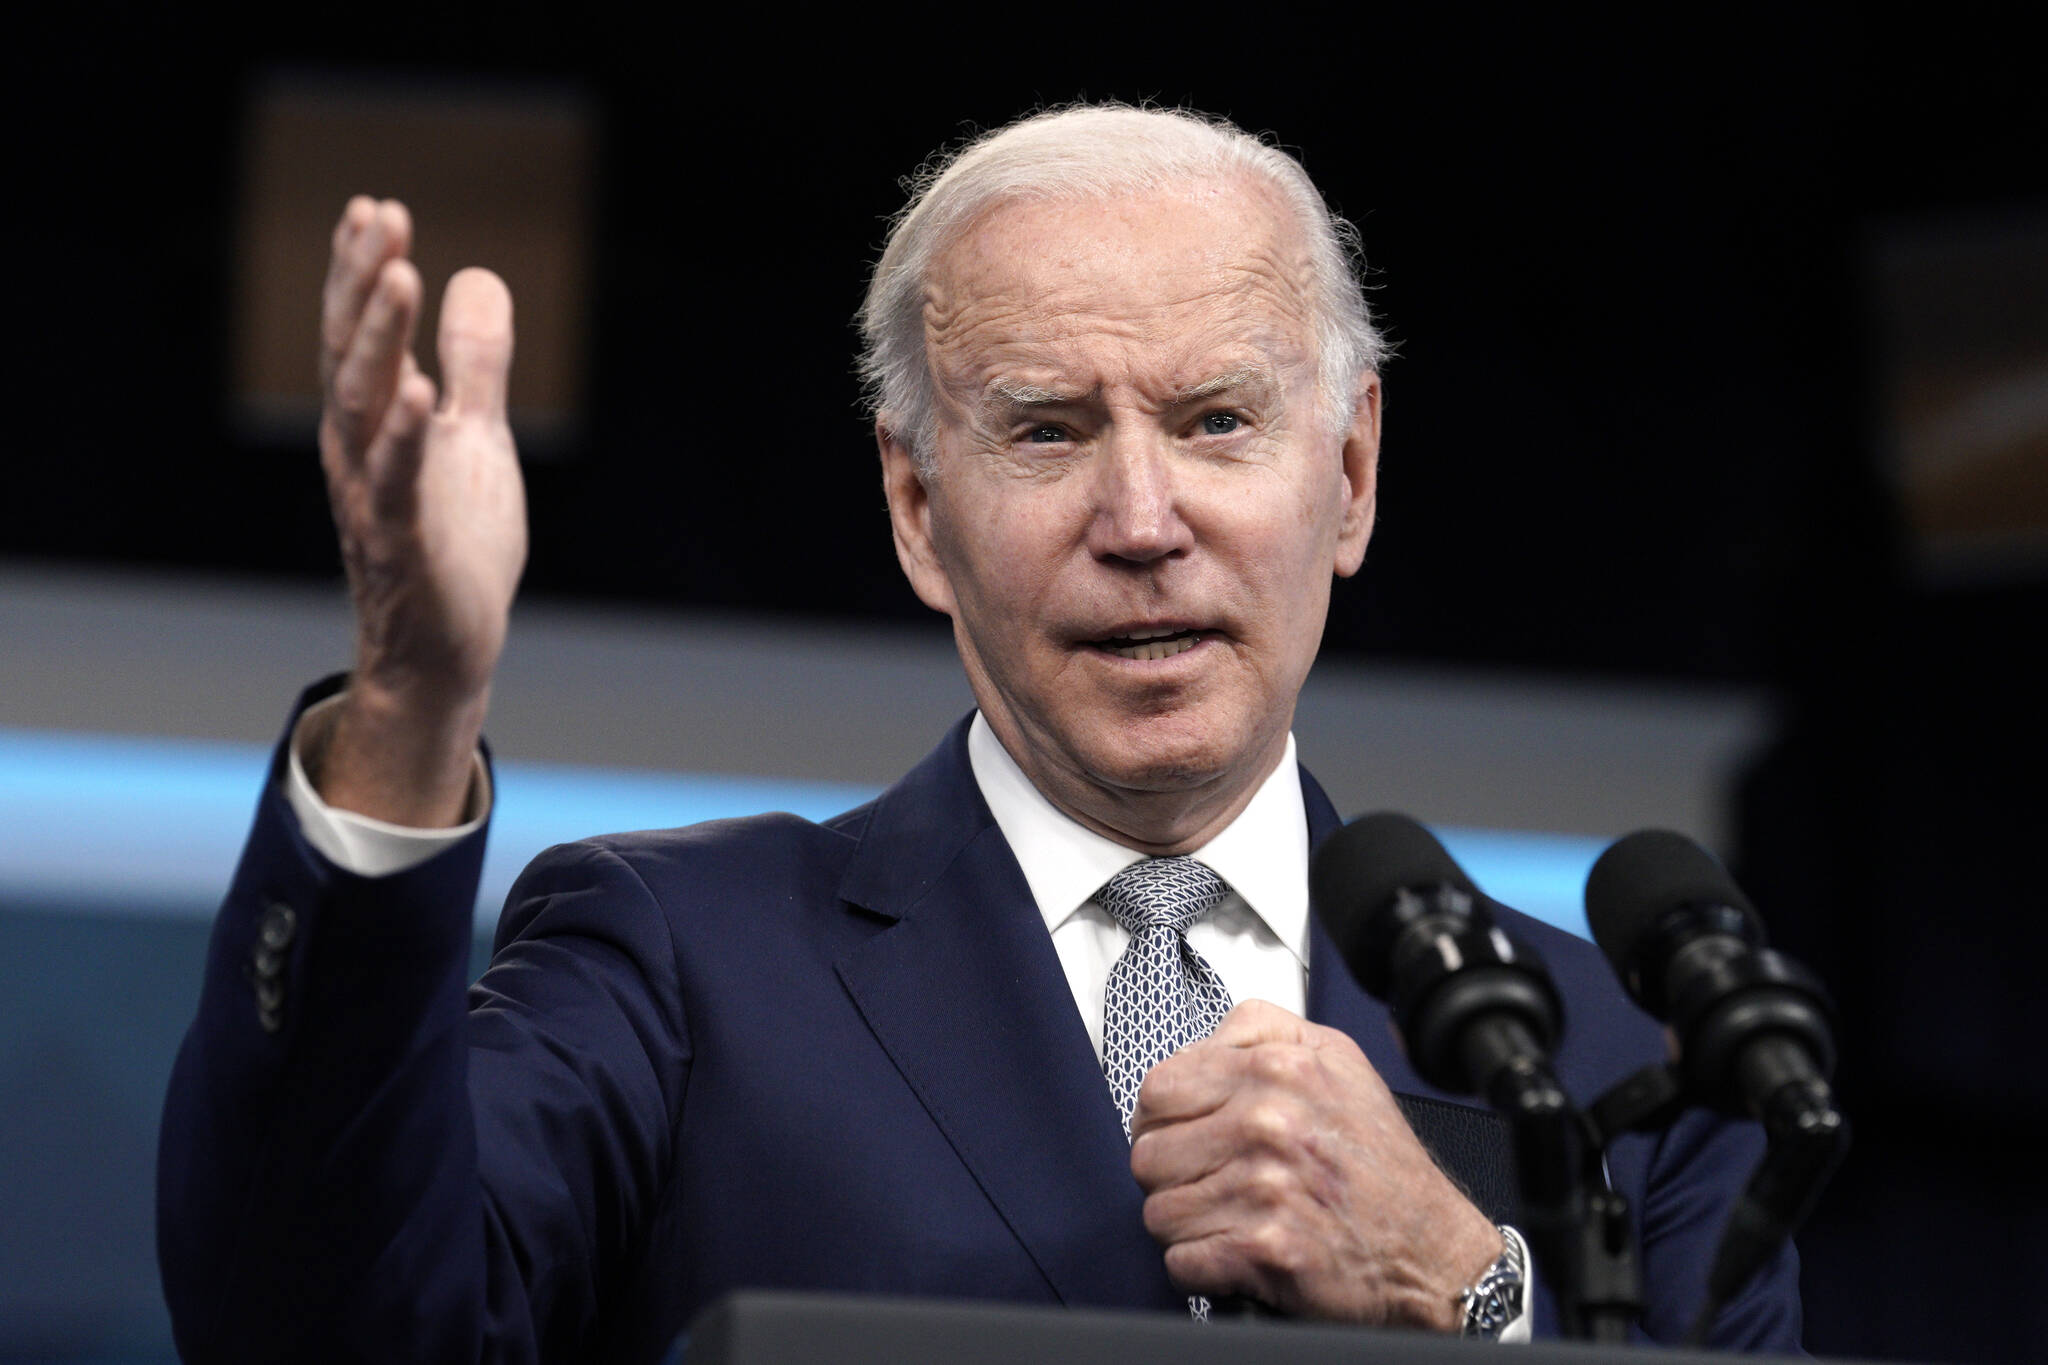 U.S. President Joe Biden replies to questions from the media after discussing inflation and lower costs for working families in the South Court Auditorium at the White House in Washington, D.C., on May 10, 2022. Yuri Gripas | Abaca Press | TNS